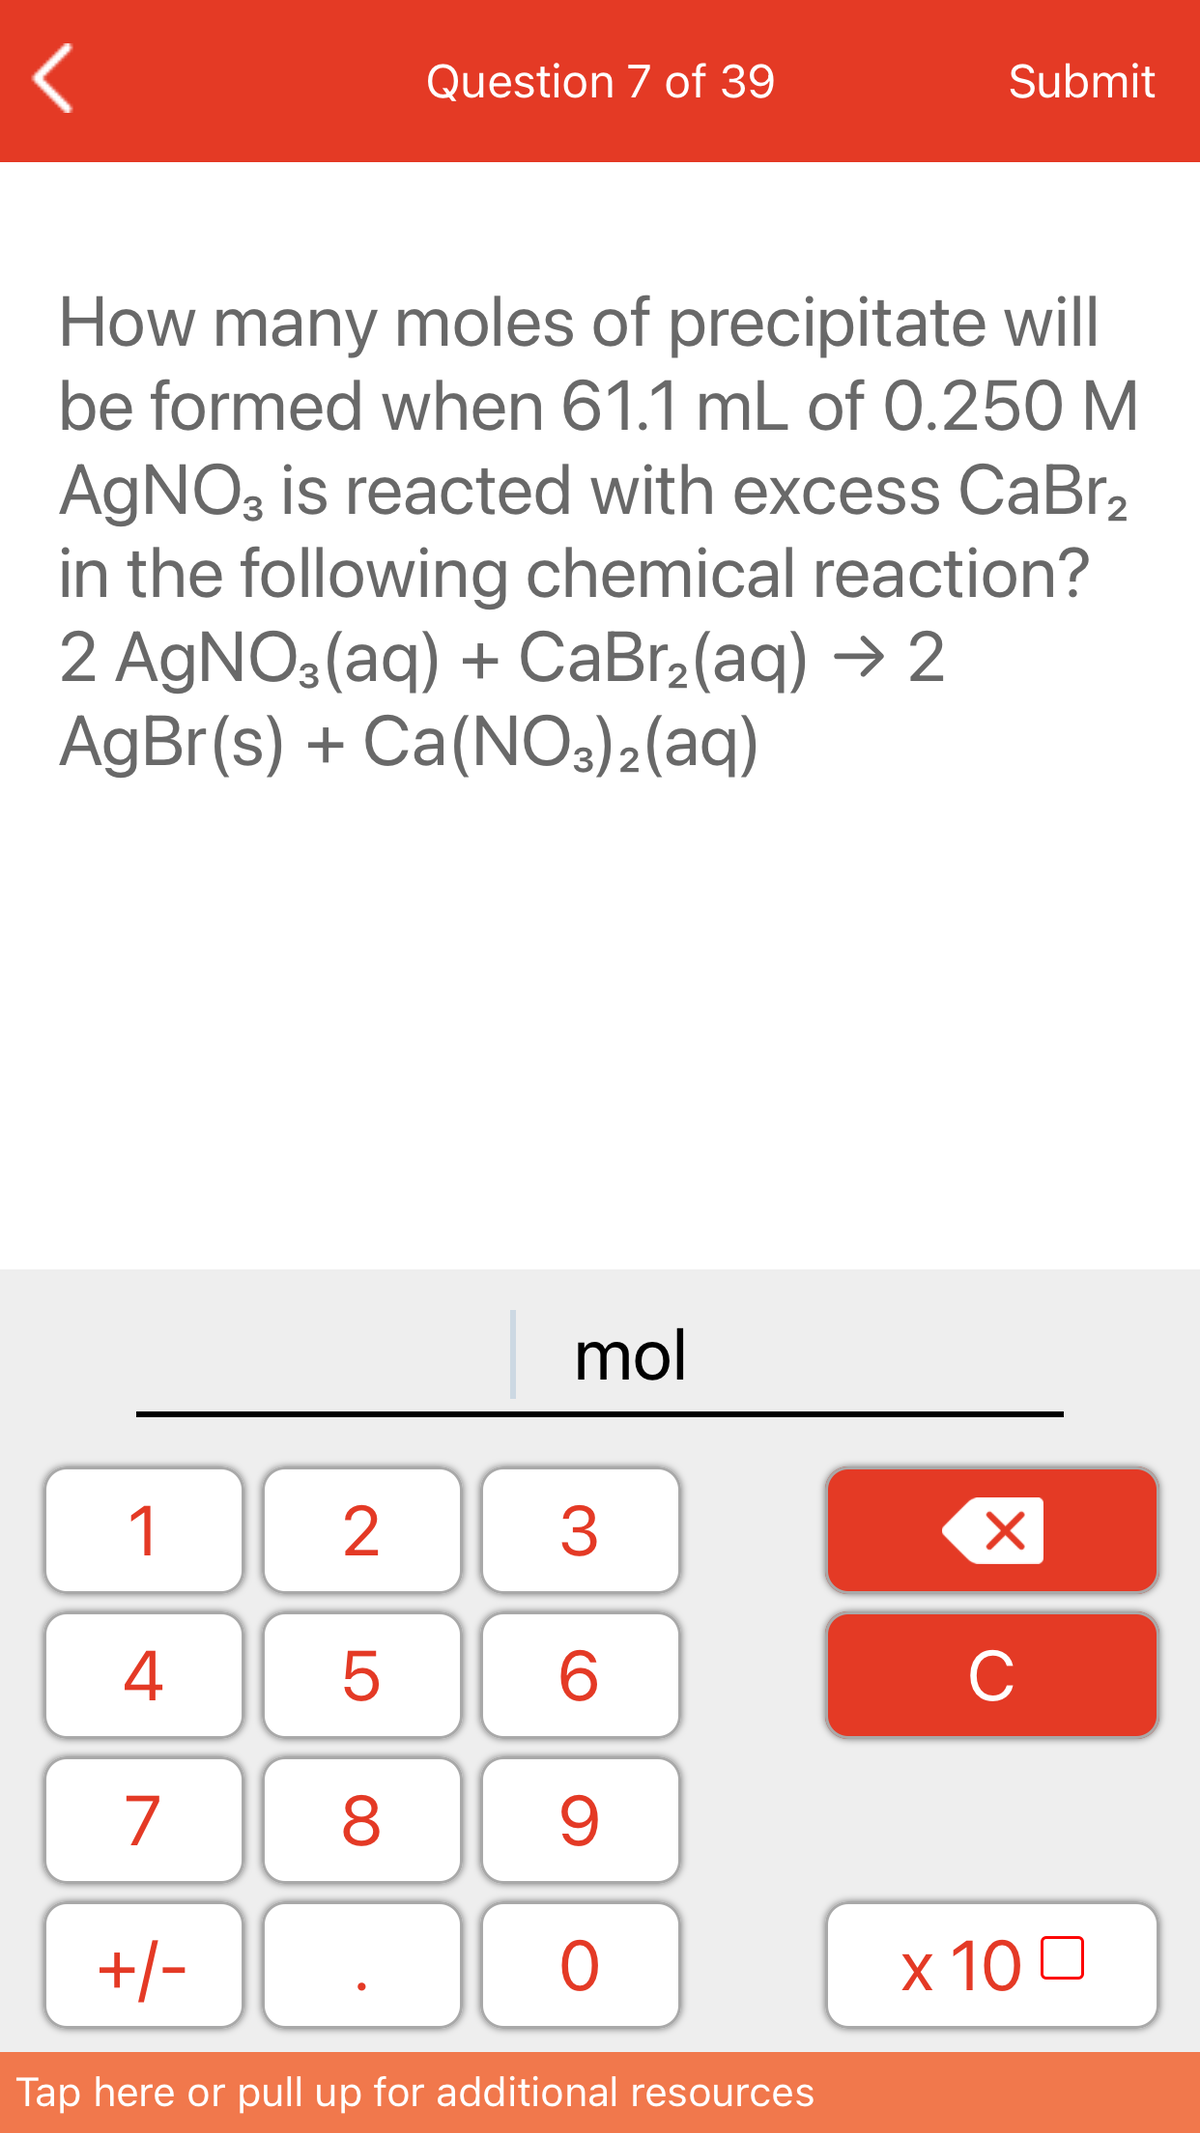 Question 7 of 39
Submit
How many moles of precipitate will
be formed when 61.1 mL of 0.250 M
AGNO3 is reacted with excess CaBr,
in the following chemical reaction?
2 AGNO3(aq) + CaBr2(aq) → 2
AgBr(s) + Ca(NO3)2(aq)
|mol
1
4
C
7
+/-
x 10 0
Tap here or pull up for additional resources
LO
00
